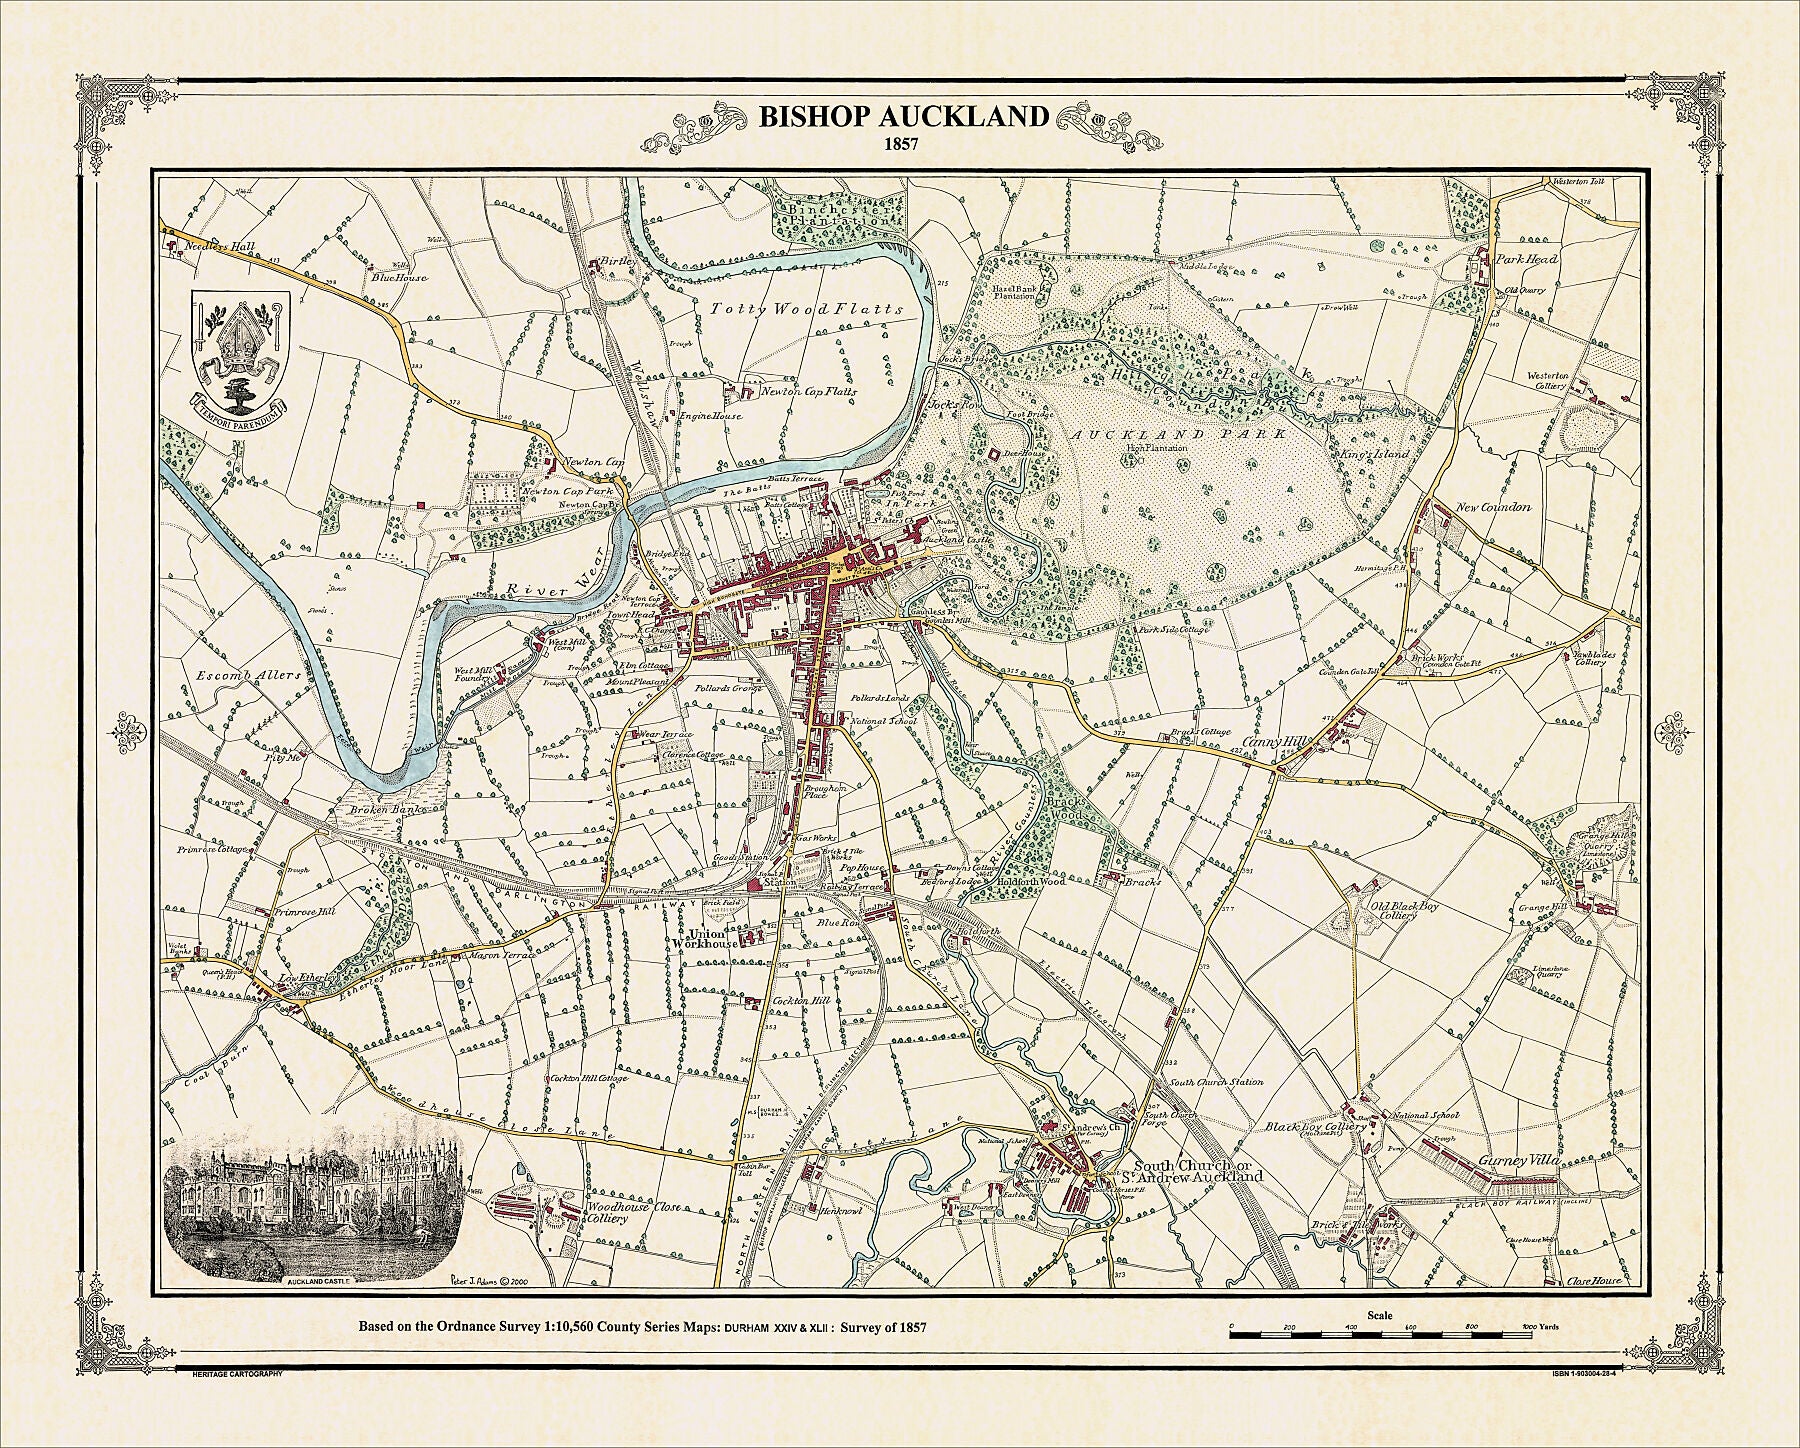 Coloured Victorian map of Bishop Auckland in 1857 by Peter J Adams of Heritage Cartography